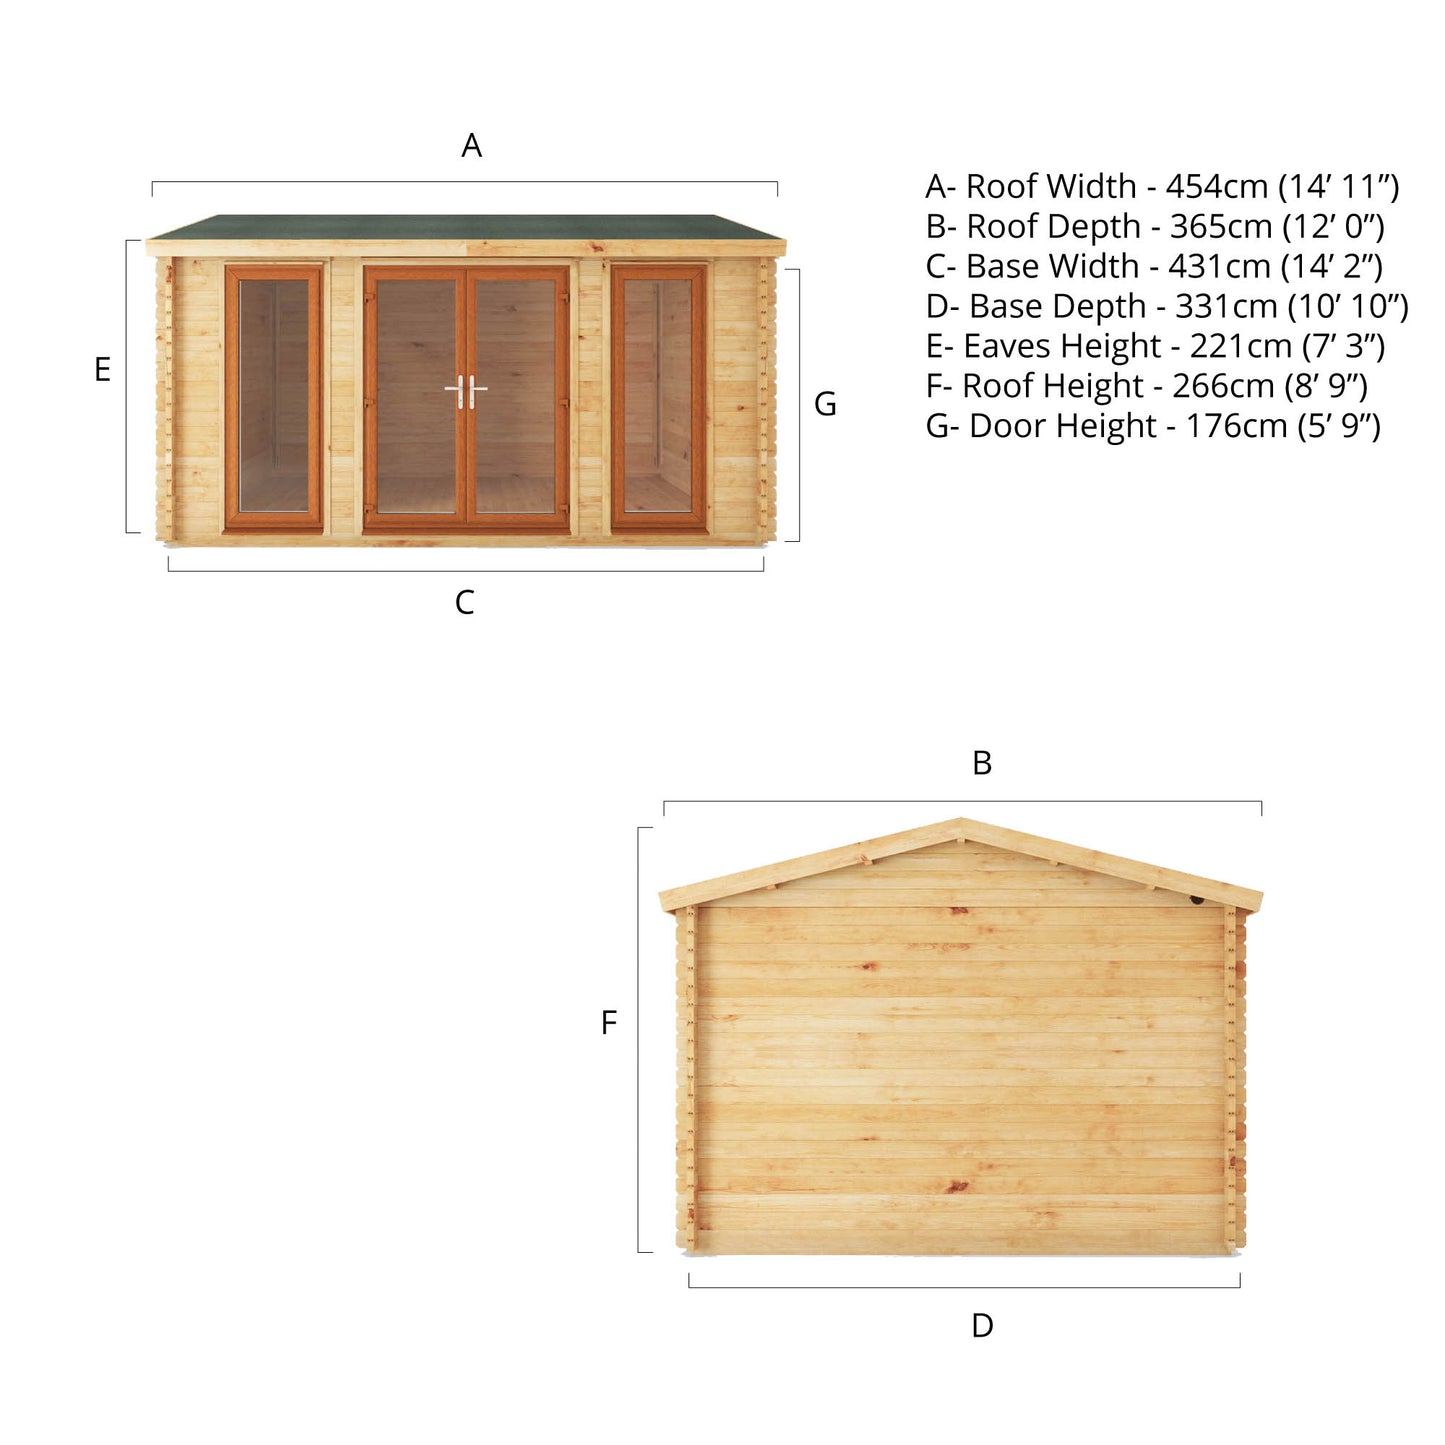 The 4.5m x 3.5m Dove Log Cabin with Oak UPVC